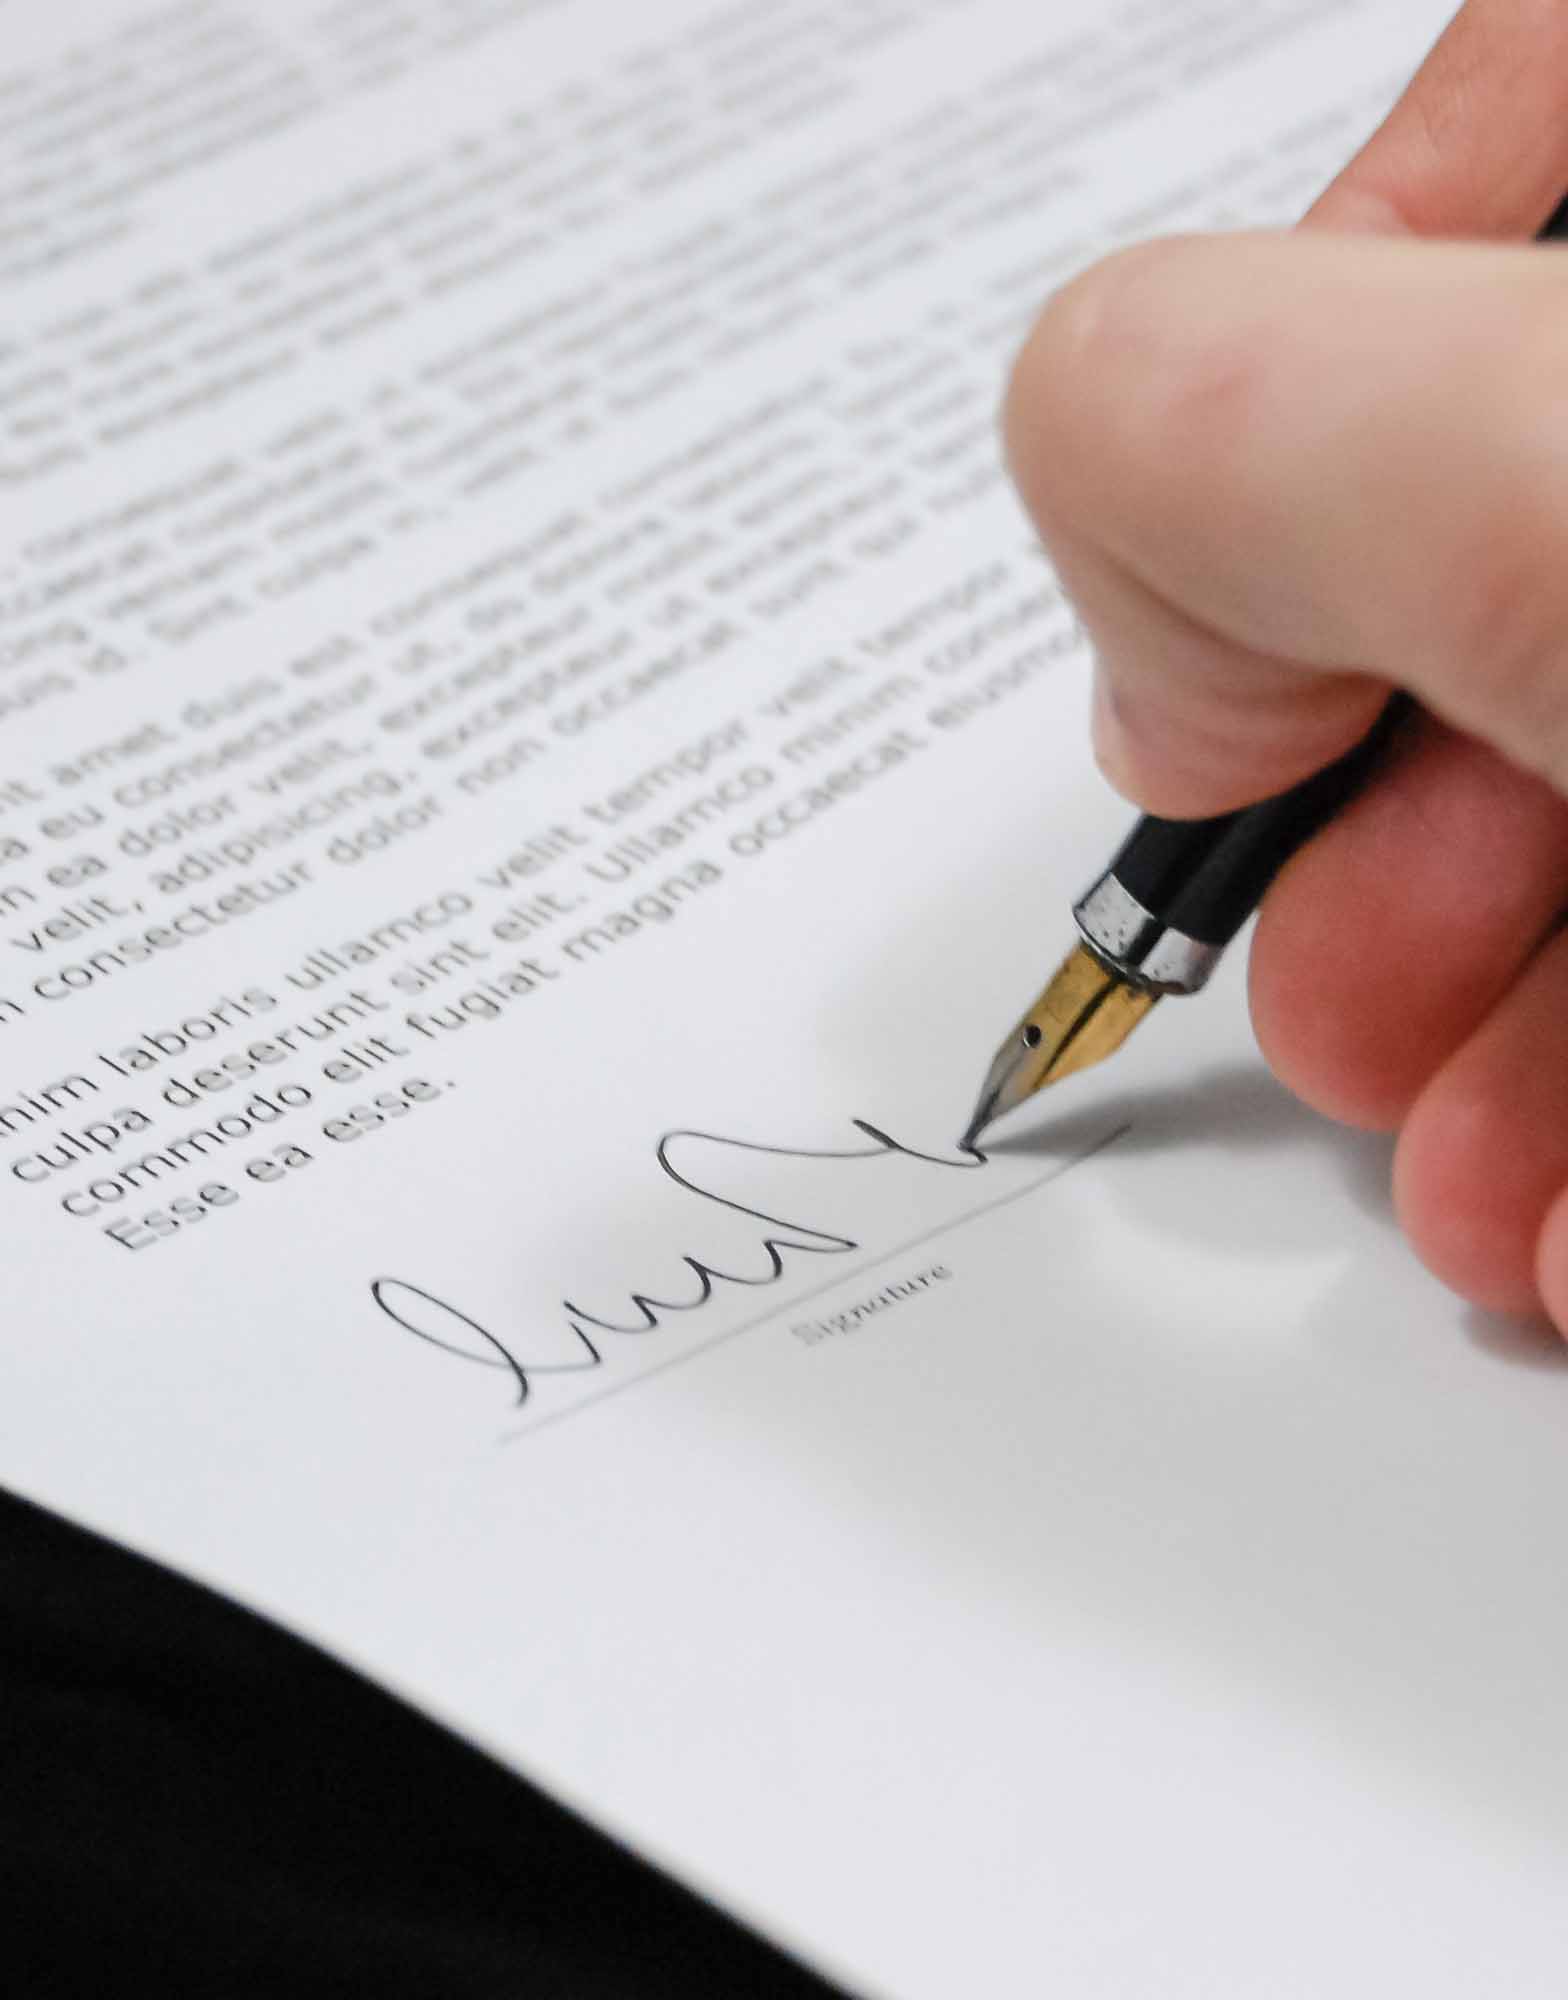 A picture of someone signing a document